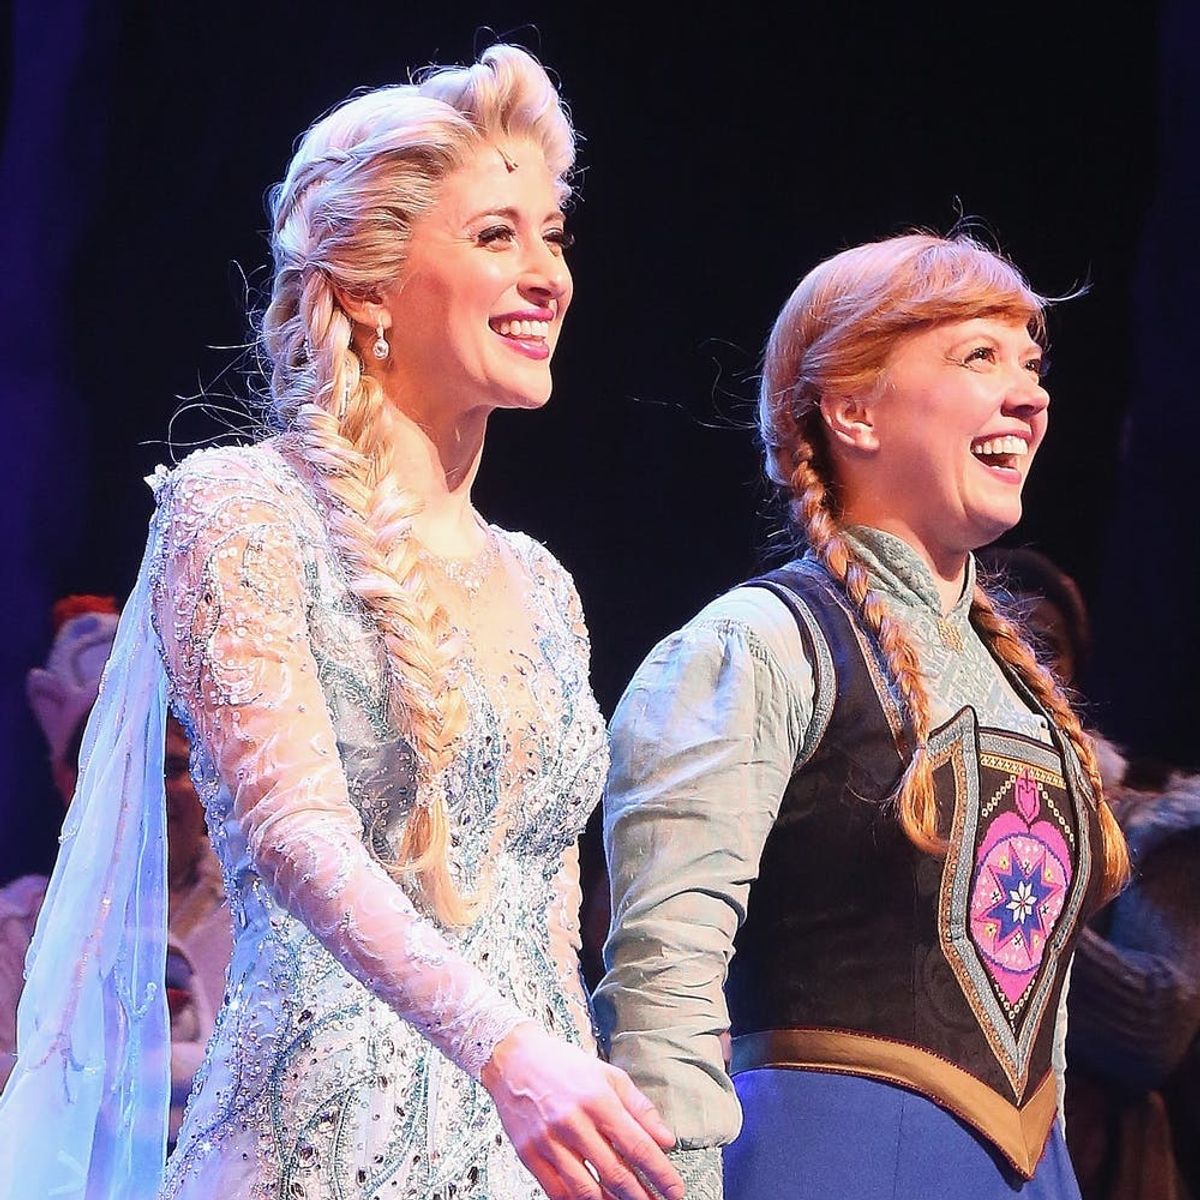 The ‘Frozen’ Musical Cast Performed on TV and It Was SO Good